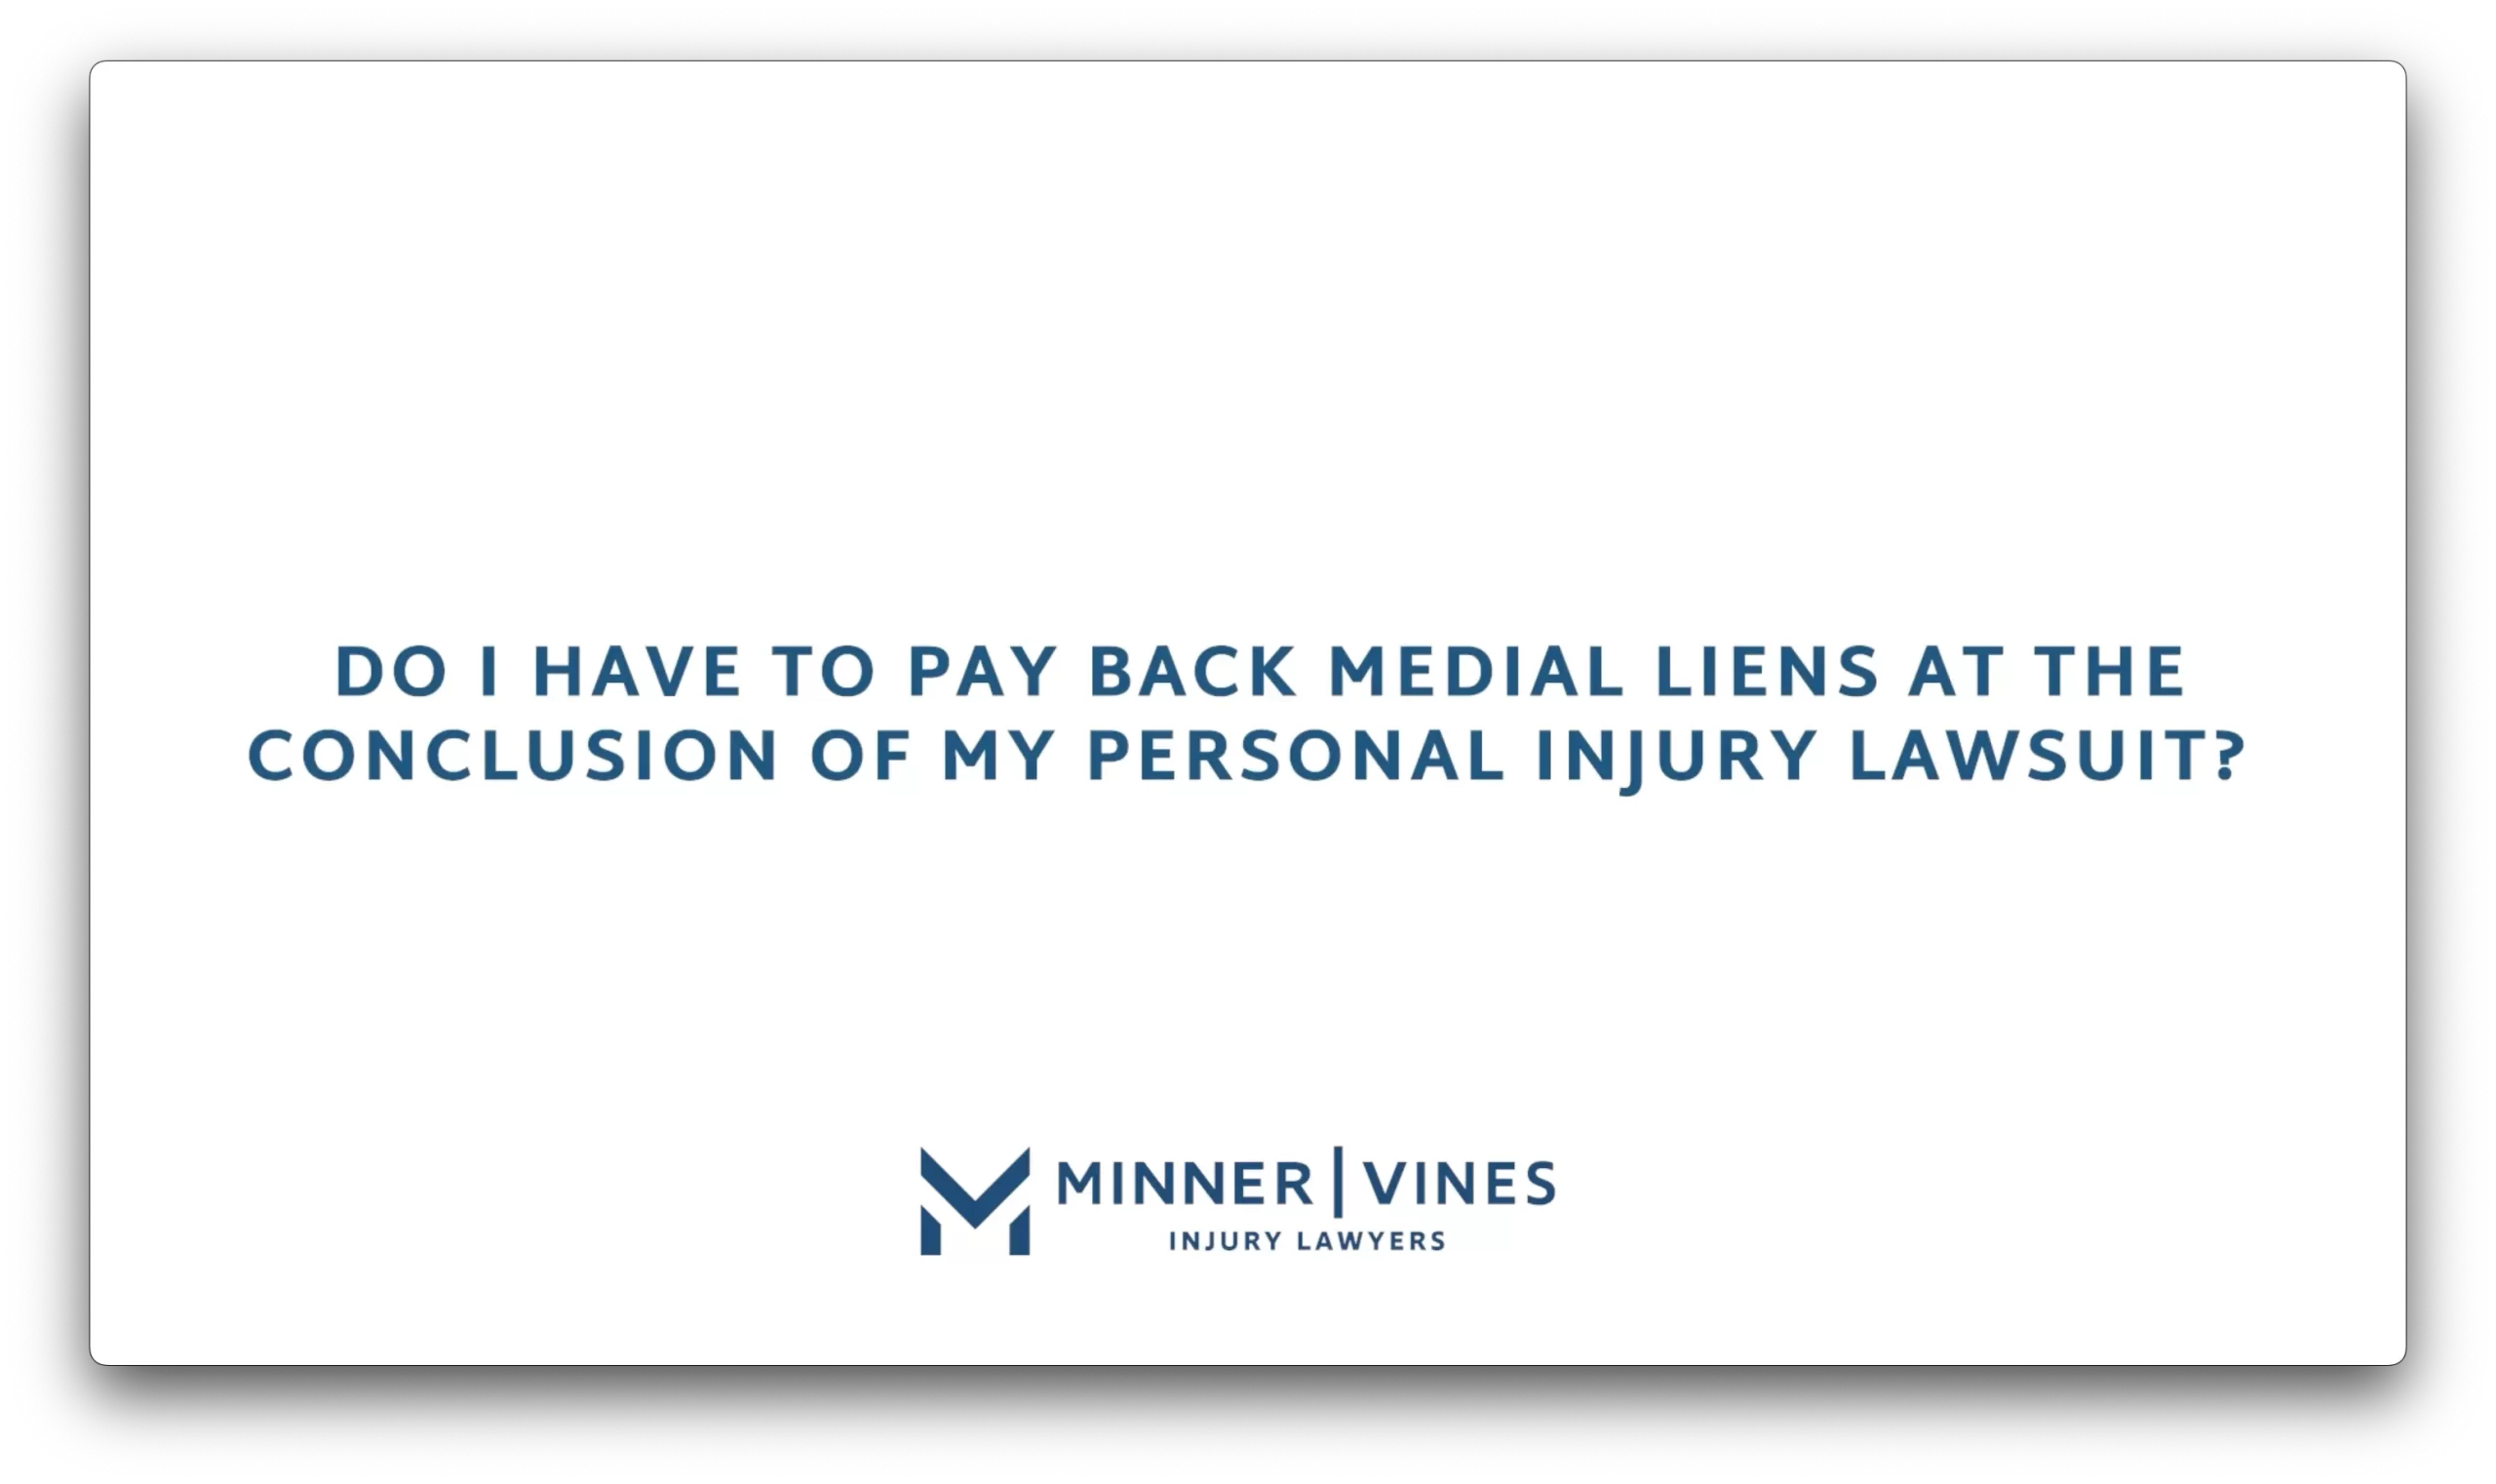 Do I have to pay back medical liens at the conclusion of my personal injury lawsuit?